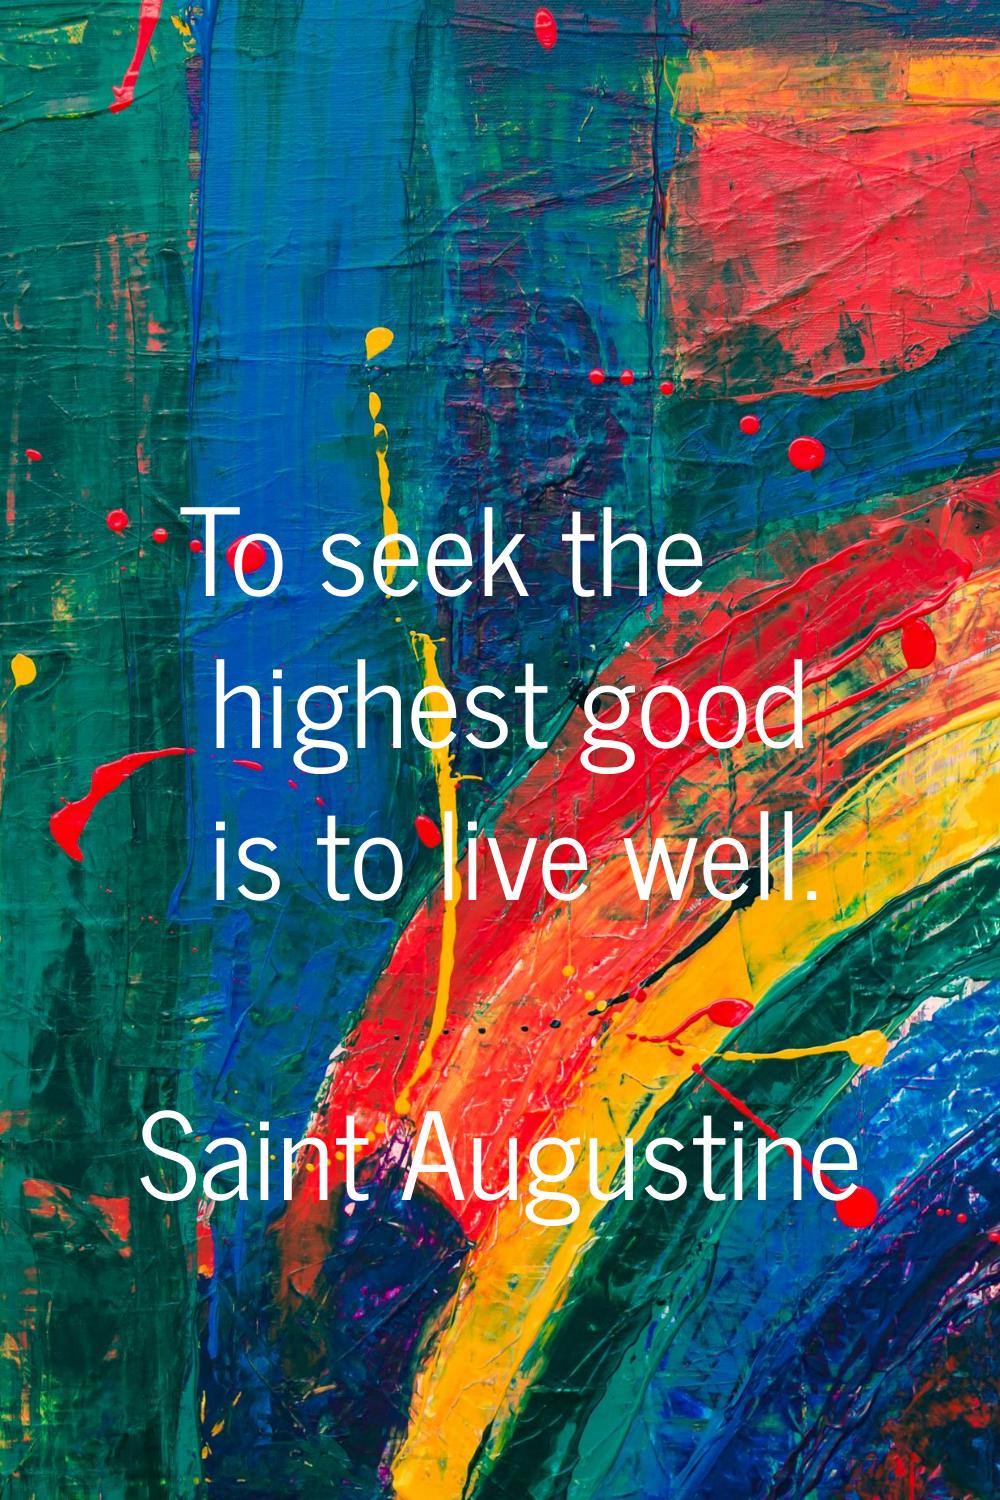 To seek the highest good is to live well.